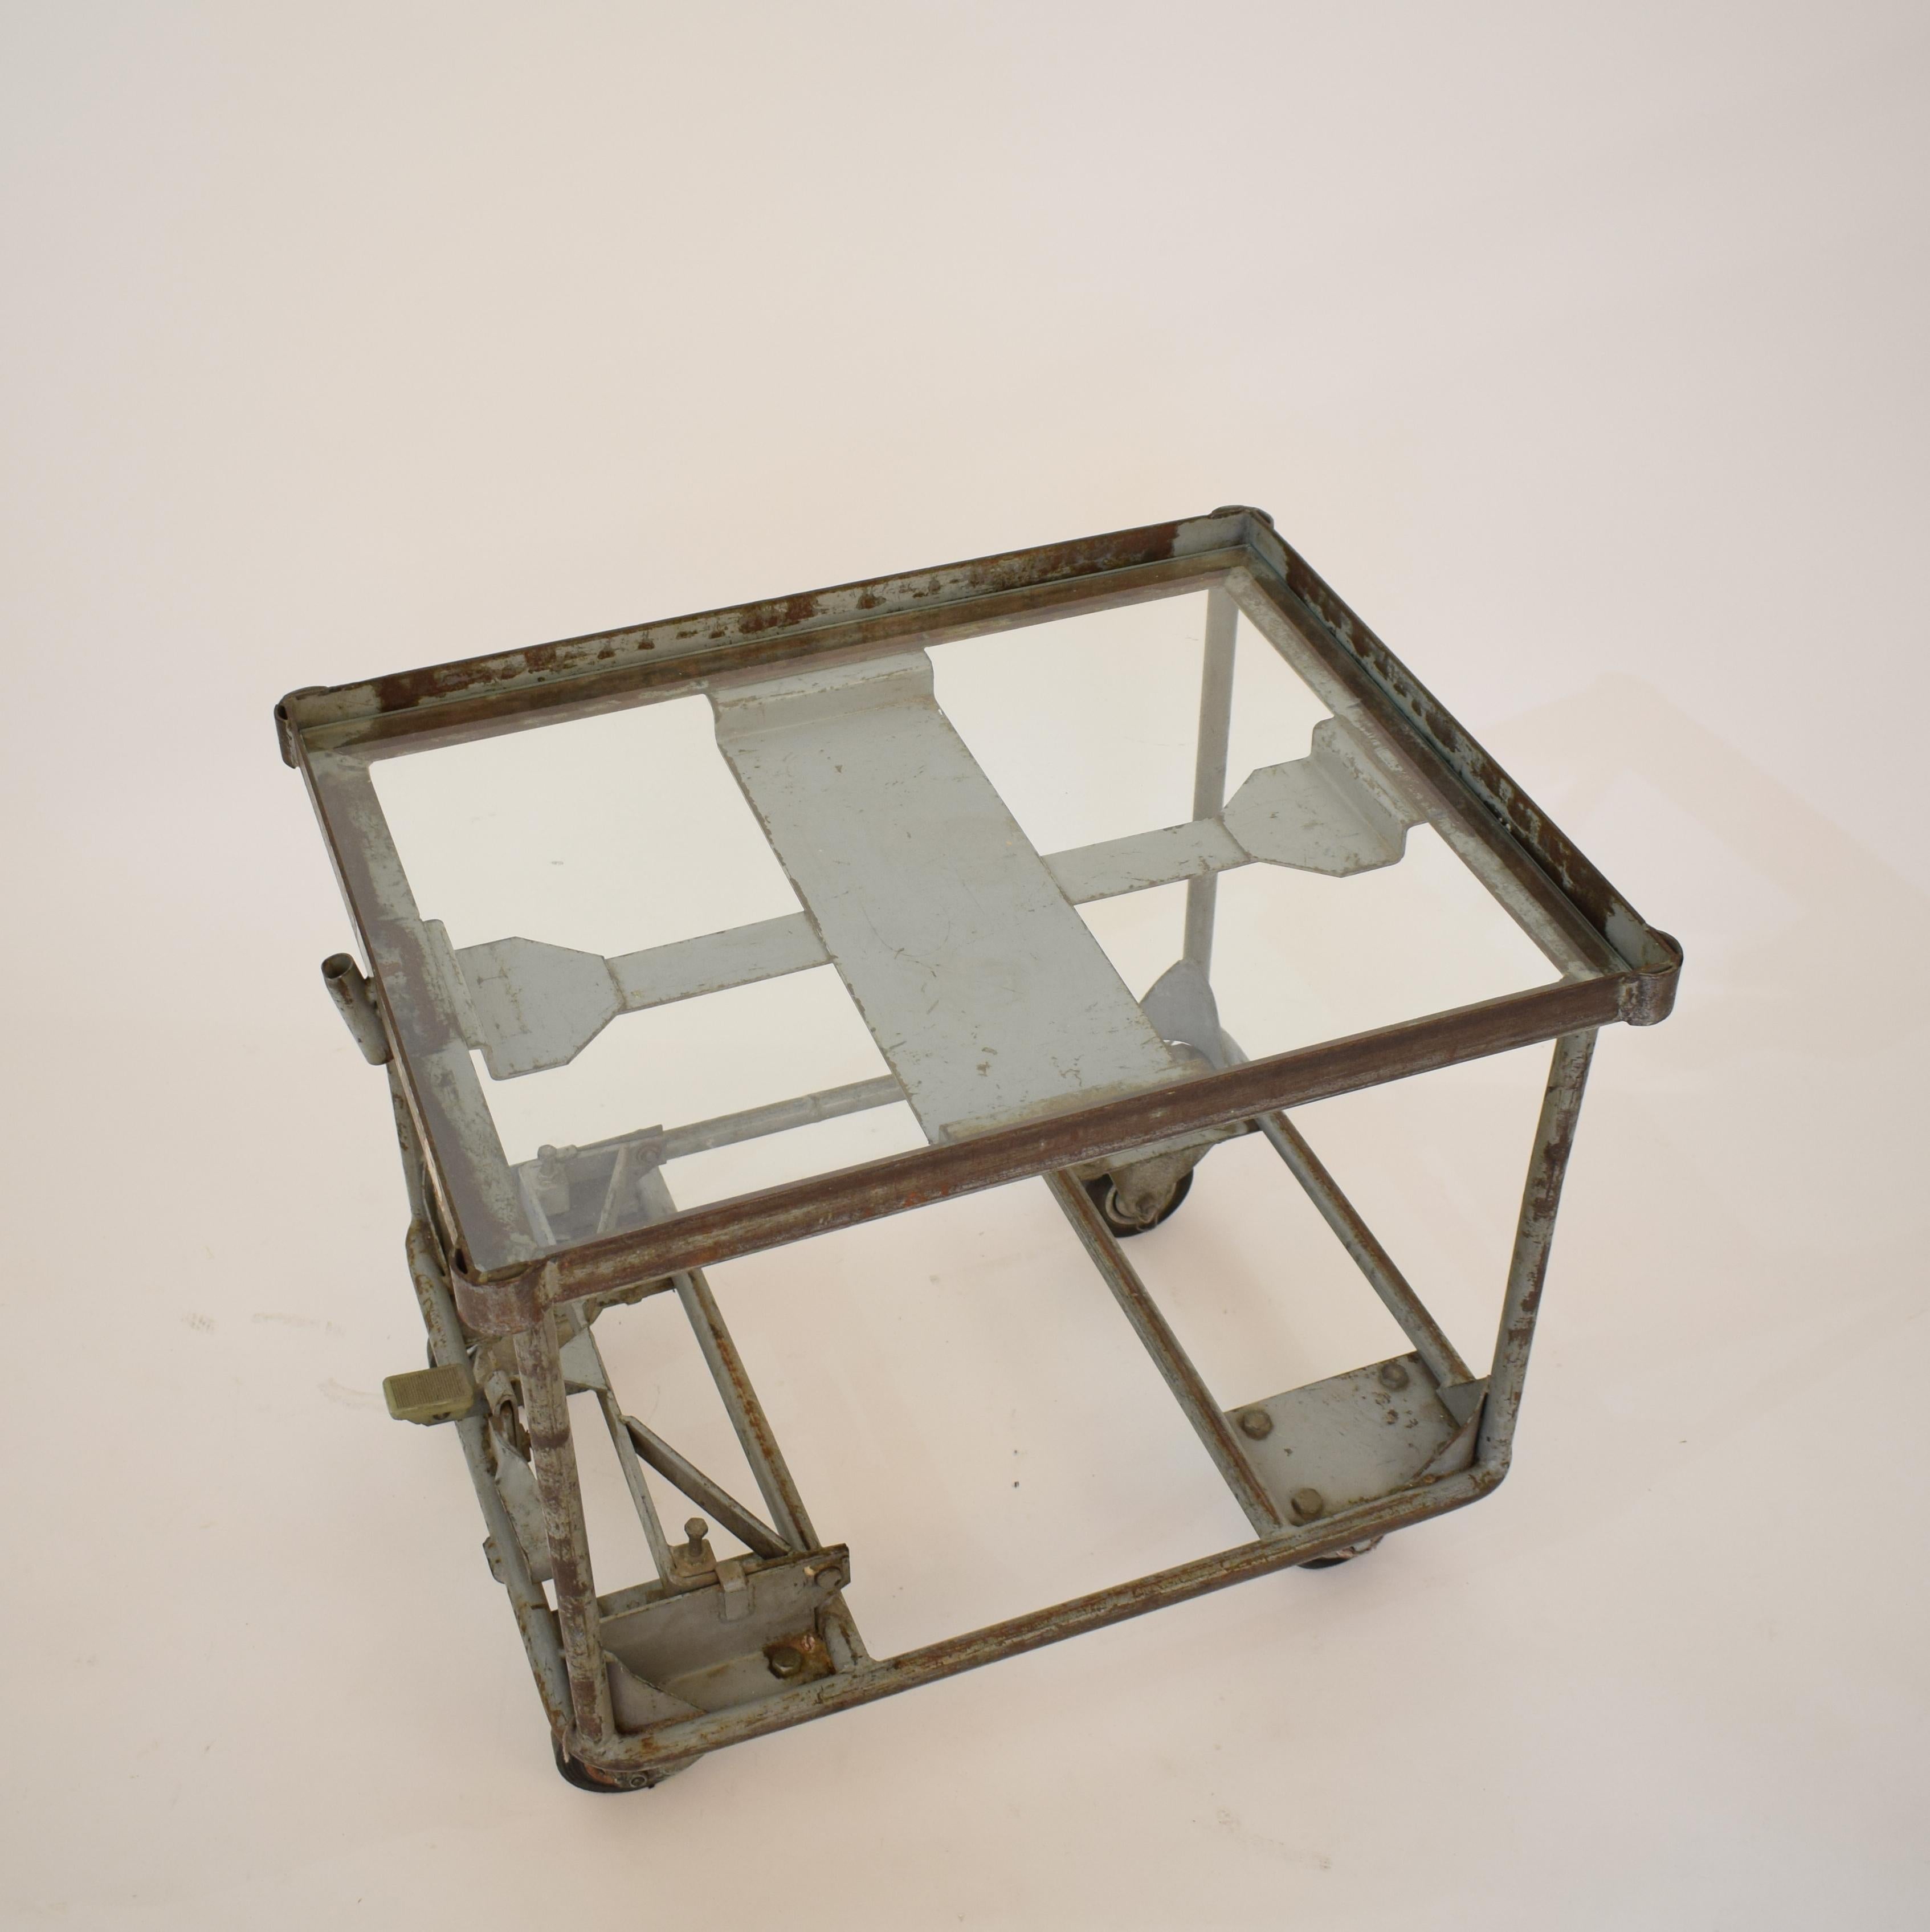 This 1950s industrial bar cart or sofa table was original a German mail trolley.
A great eye-catcher for your interior.
 